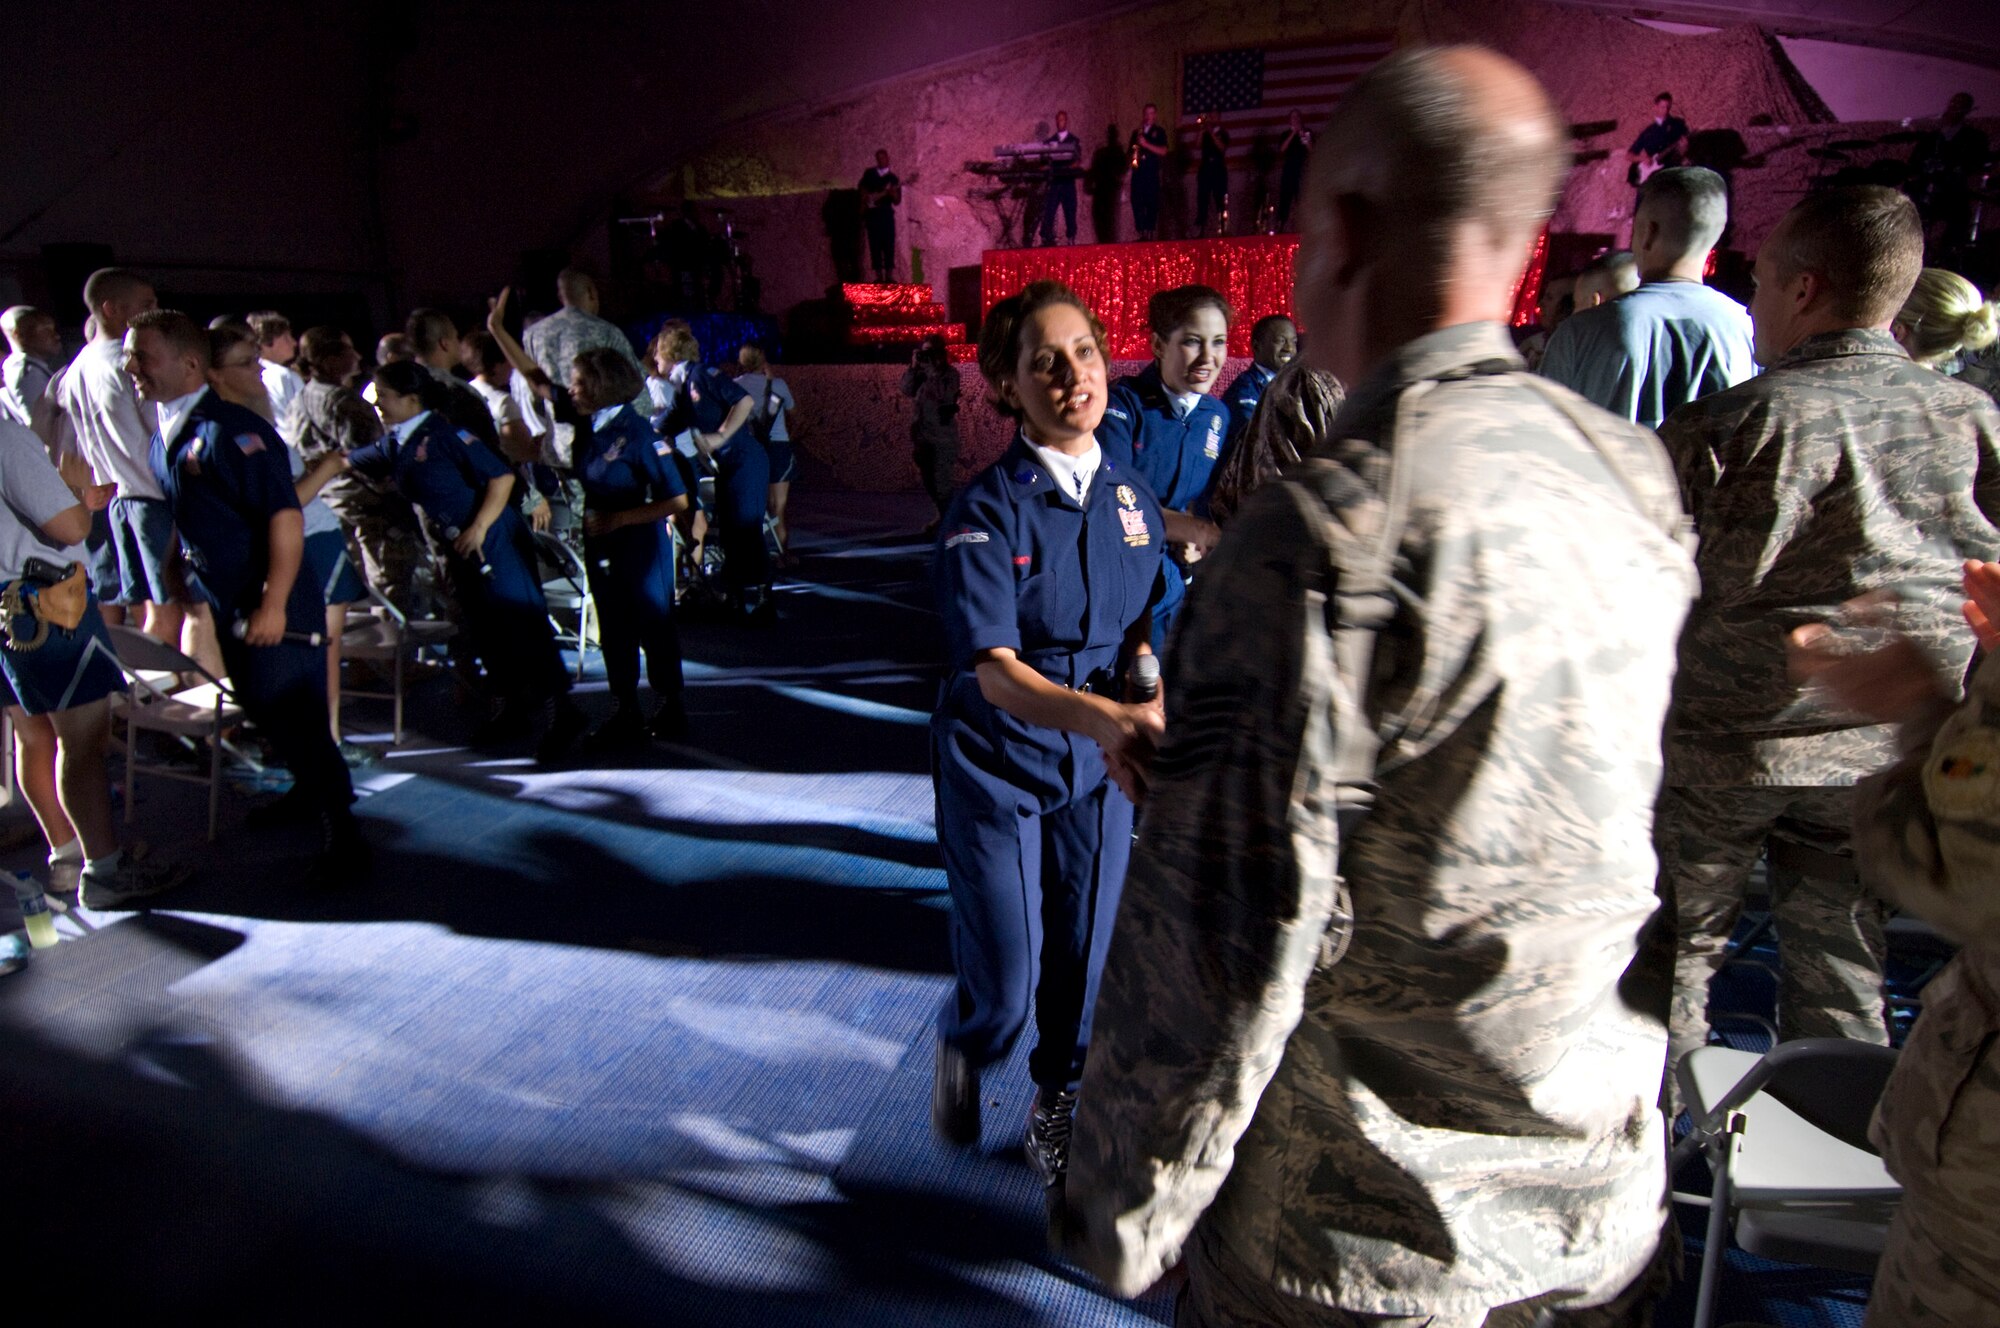 BAGRAM AIR FIELD, Afghanistan -- Tech. Sgt. Chandra Smith, vocalist for Tops in Blue, meets and greets an audience member following a performance here on July 13, 2008. Vocalists and instrumentalists representing a wide range of career fields across the Air Force auditioned to tour for 9 months performing the 2008 show "Deja Blue" all over the world. Sergeant Smith works for the command support staff, 162nd Fighter Wing (Alert Detachment), Air National Guard, Davis-Monthan Air Force Base, Ariz., and hails from Clarinda, Iowa. (U.S. Air Force photo by Staff Sgt. Samuel Morse)